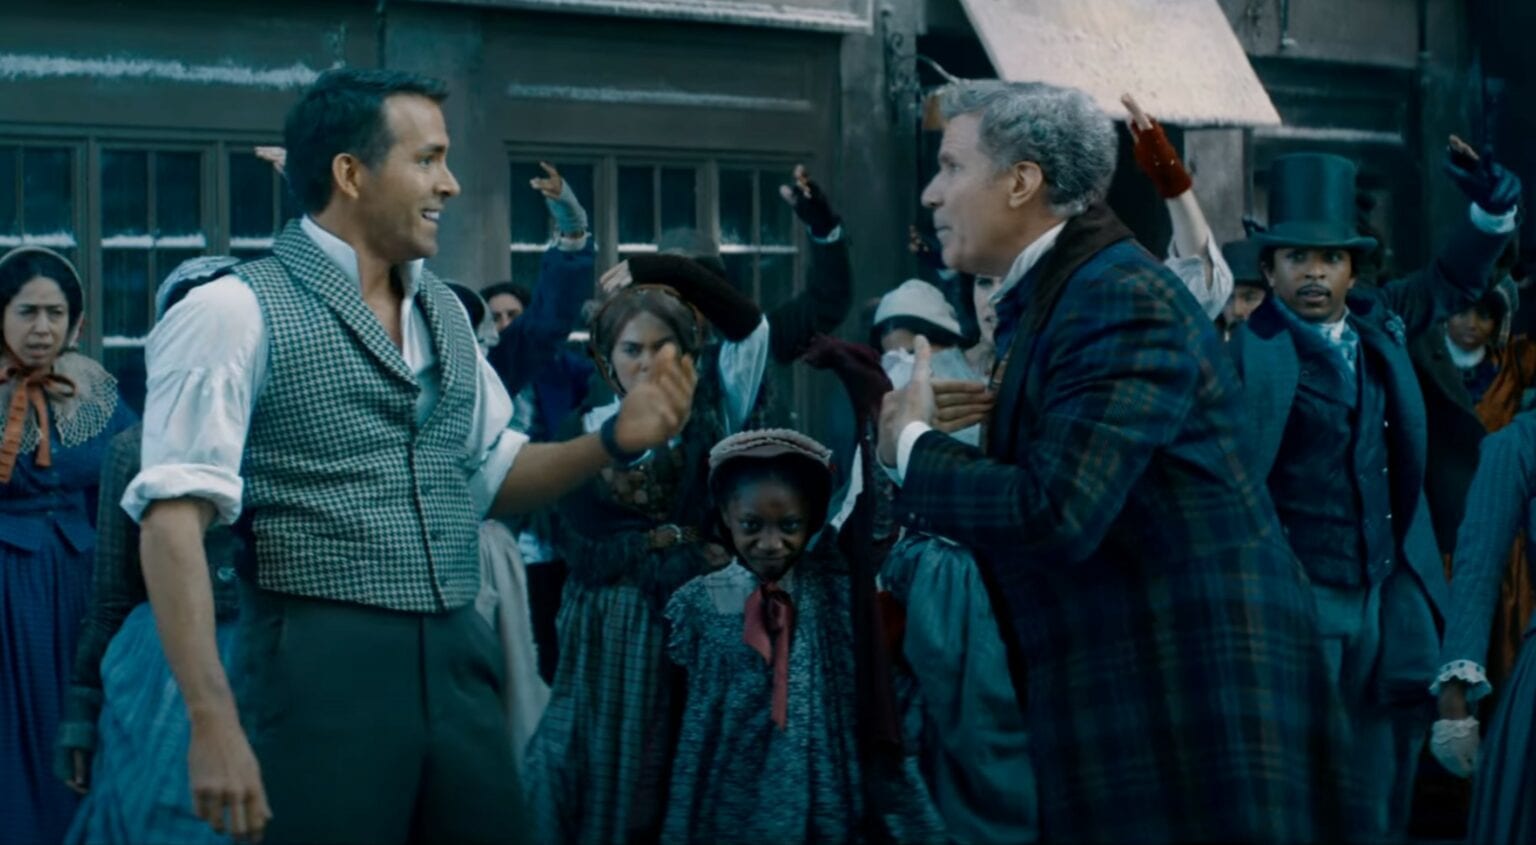 Ryan Reynold share a new enthusiasm for tap dancing in the teaser for the Apple TV+ musical 